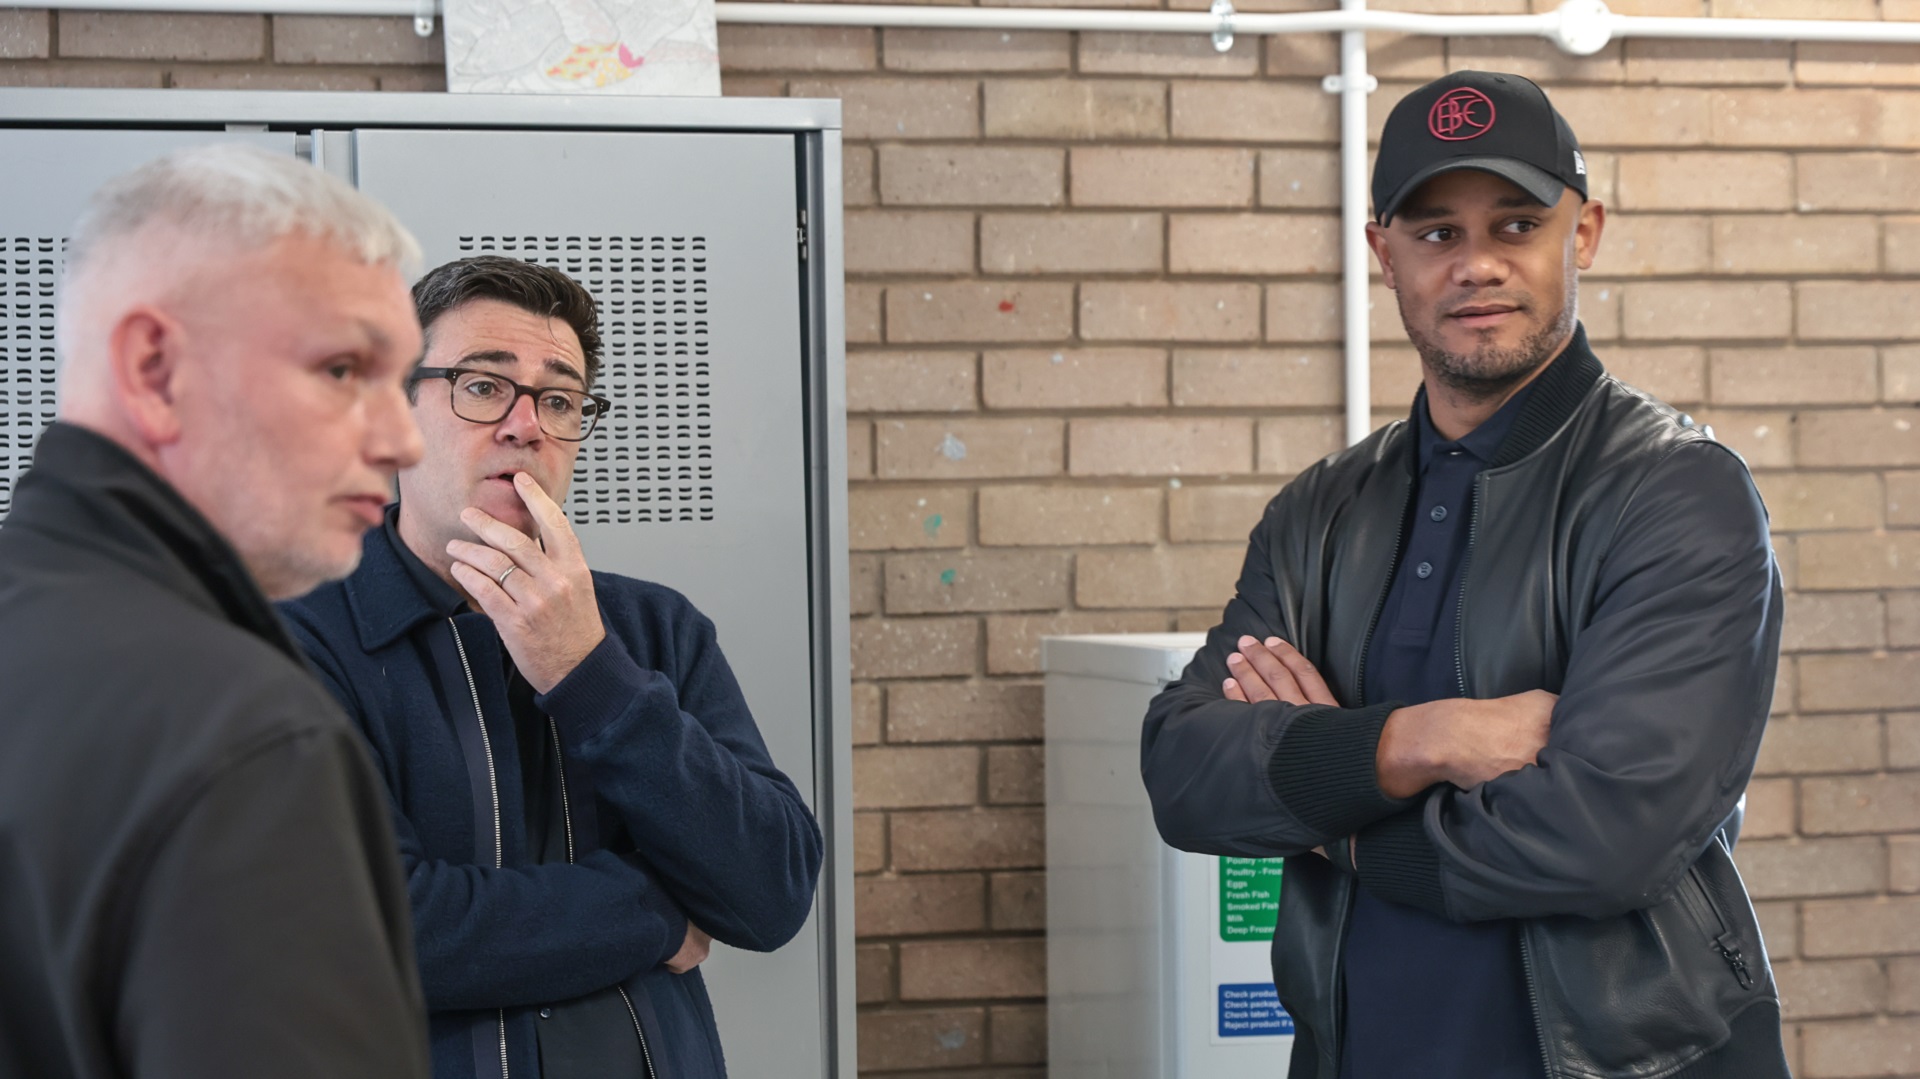 Vincent Kompany and Andy Burnham visit homelessness charity in Manchester